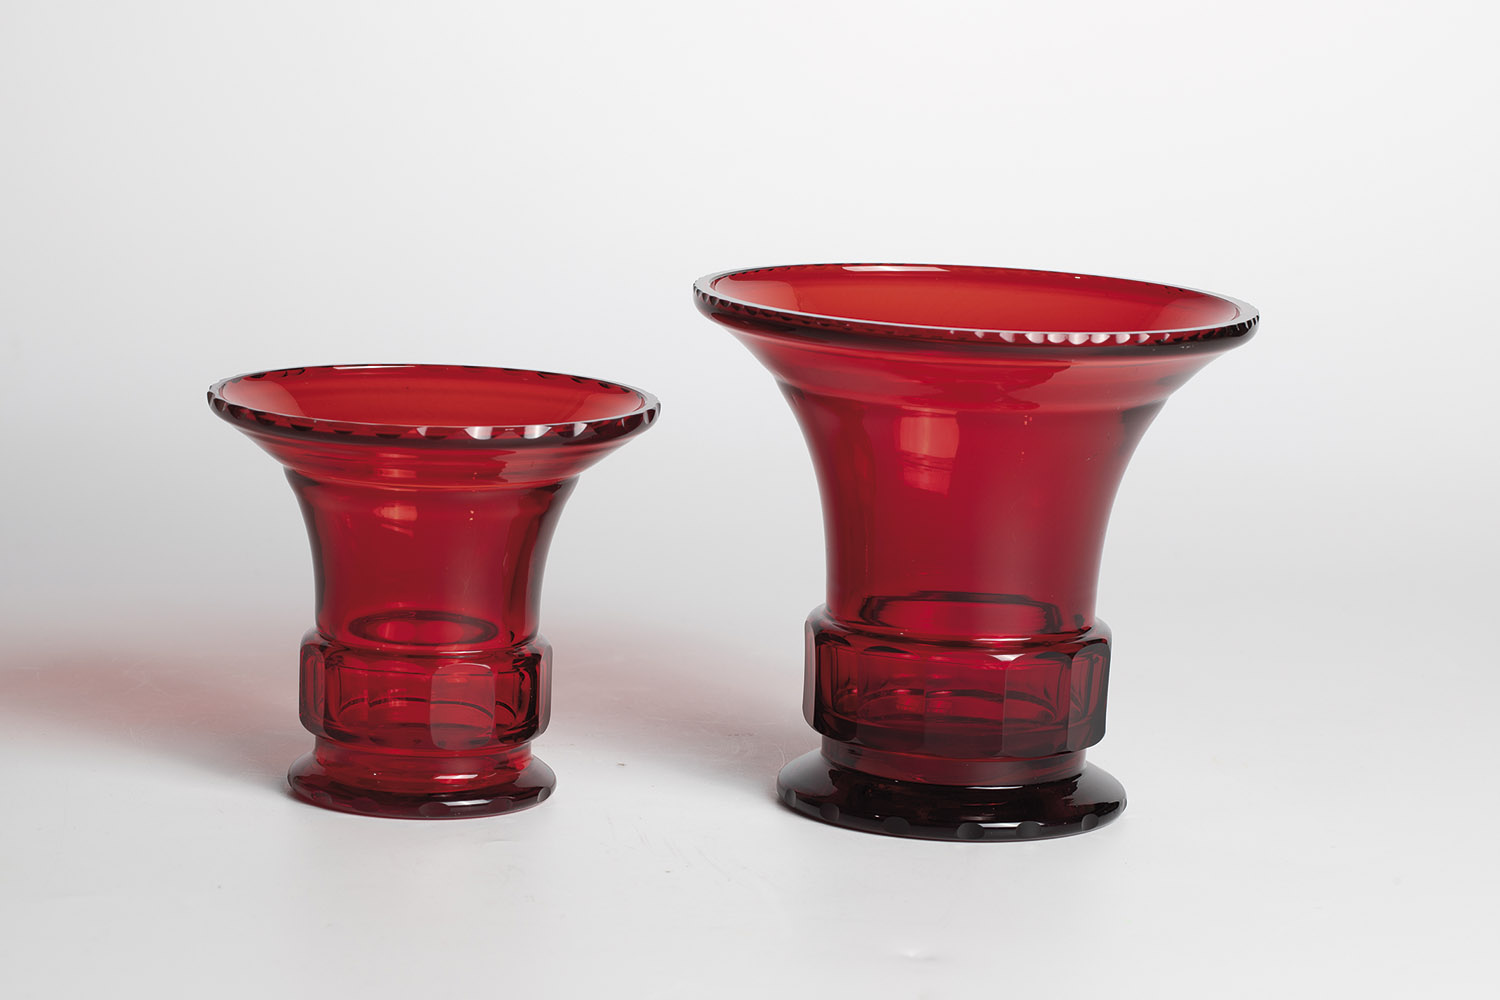 Two vases Jean Beck, Munich, ca. 1920 Red glass with cut decoration. Both vases on the bottom